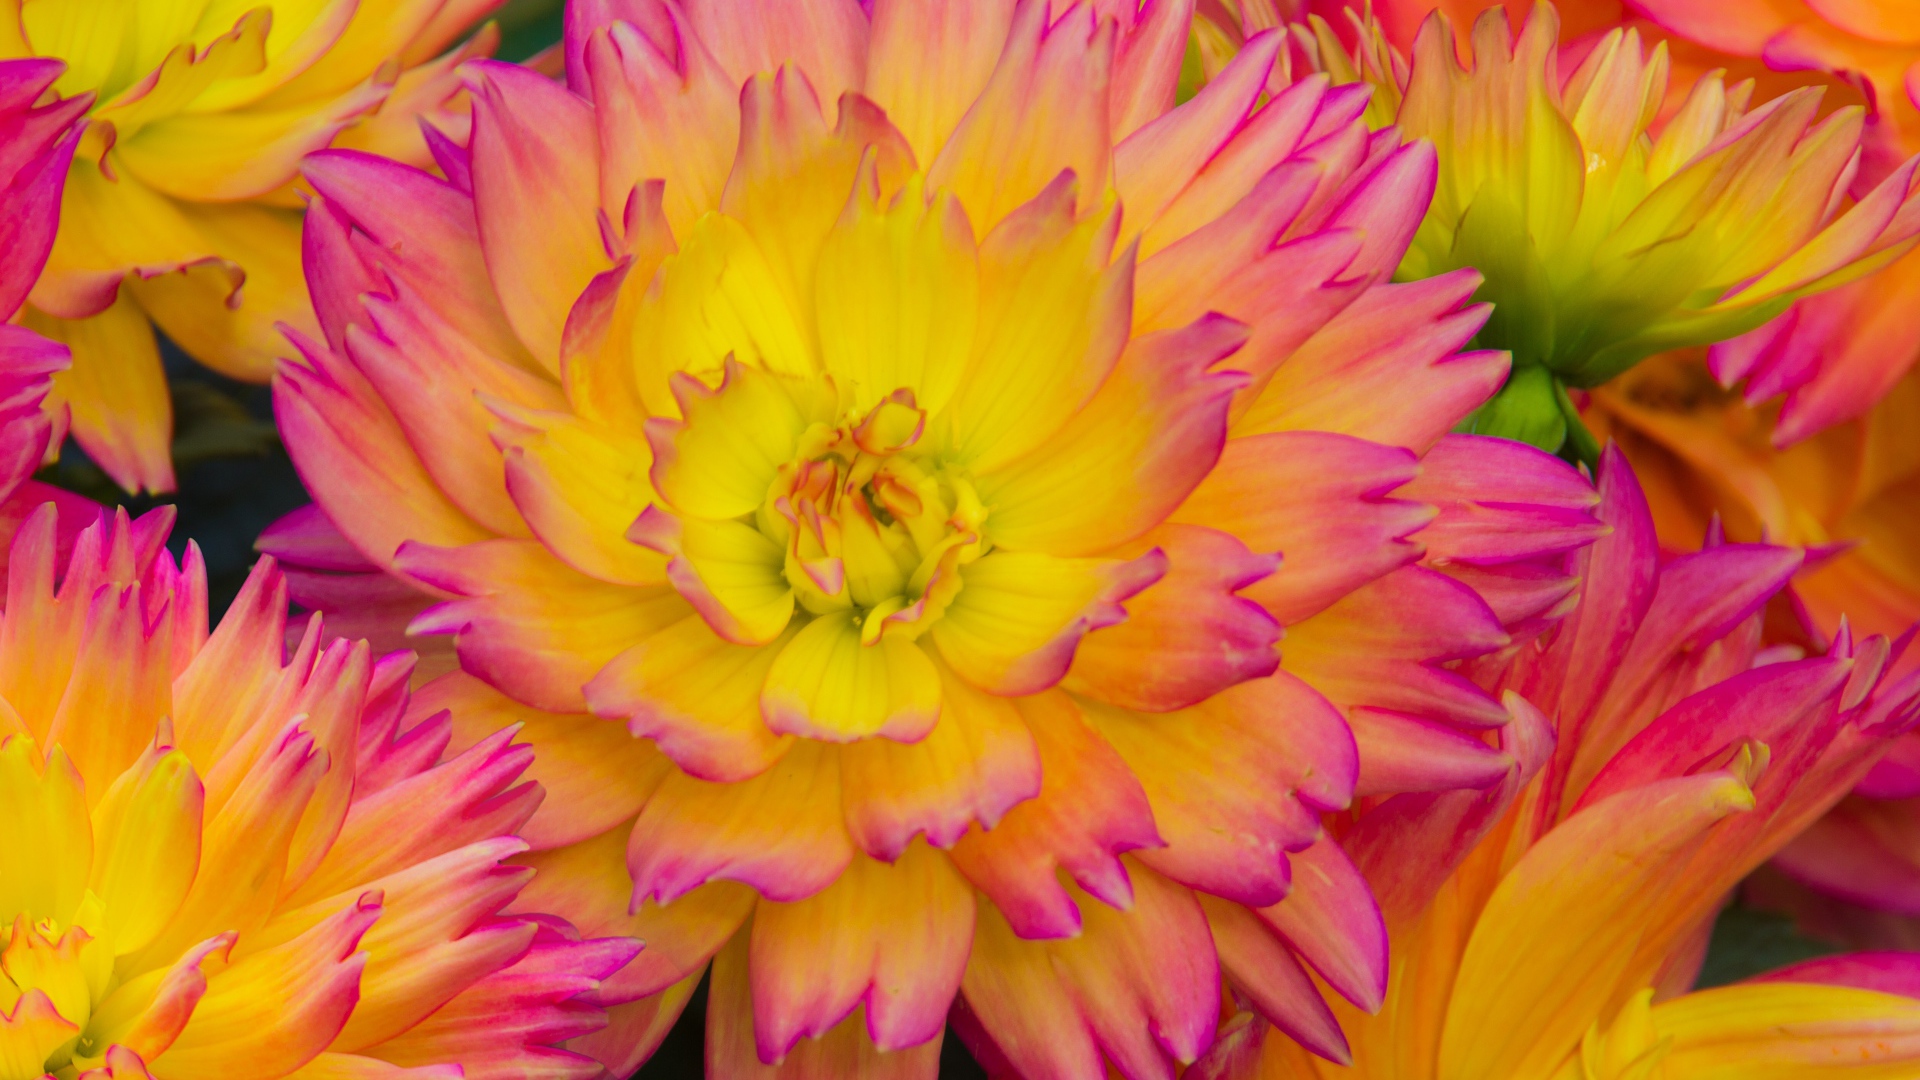 Pink dahlia flowers with yellow center